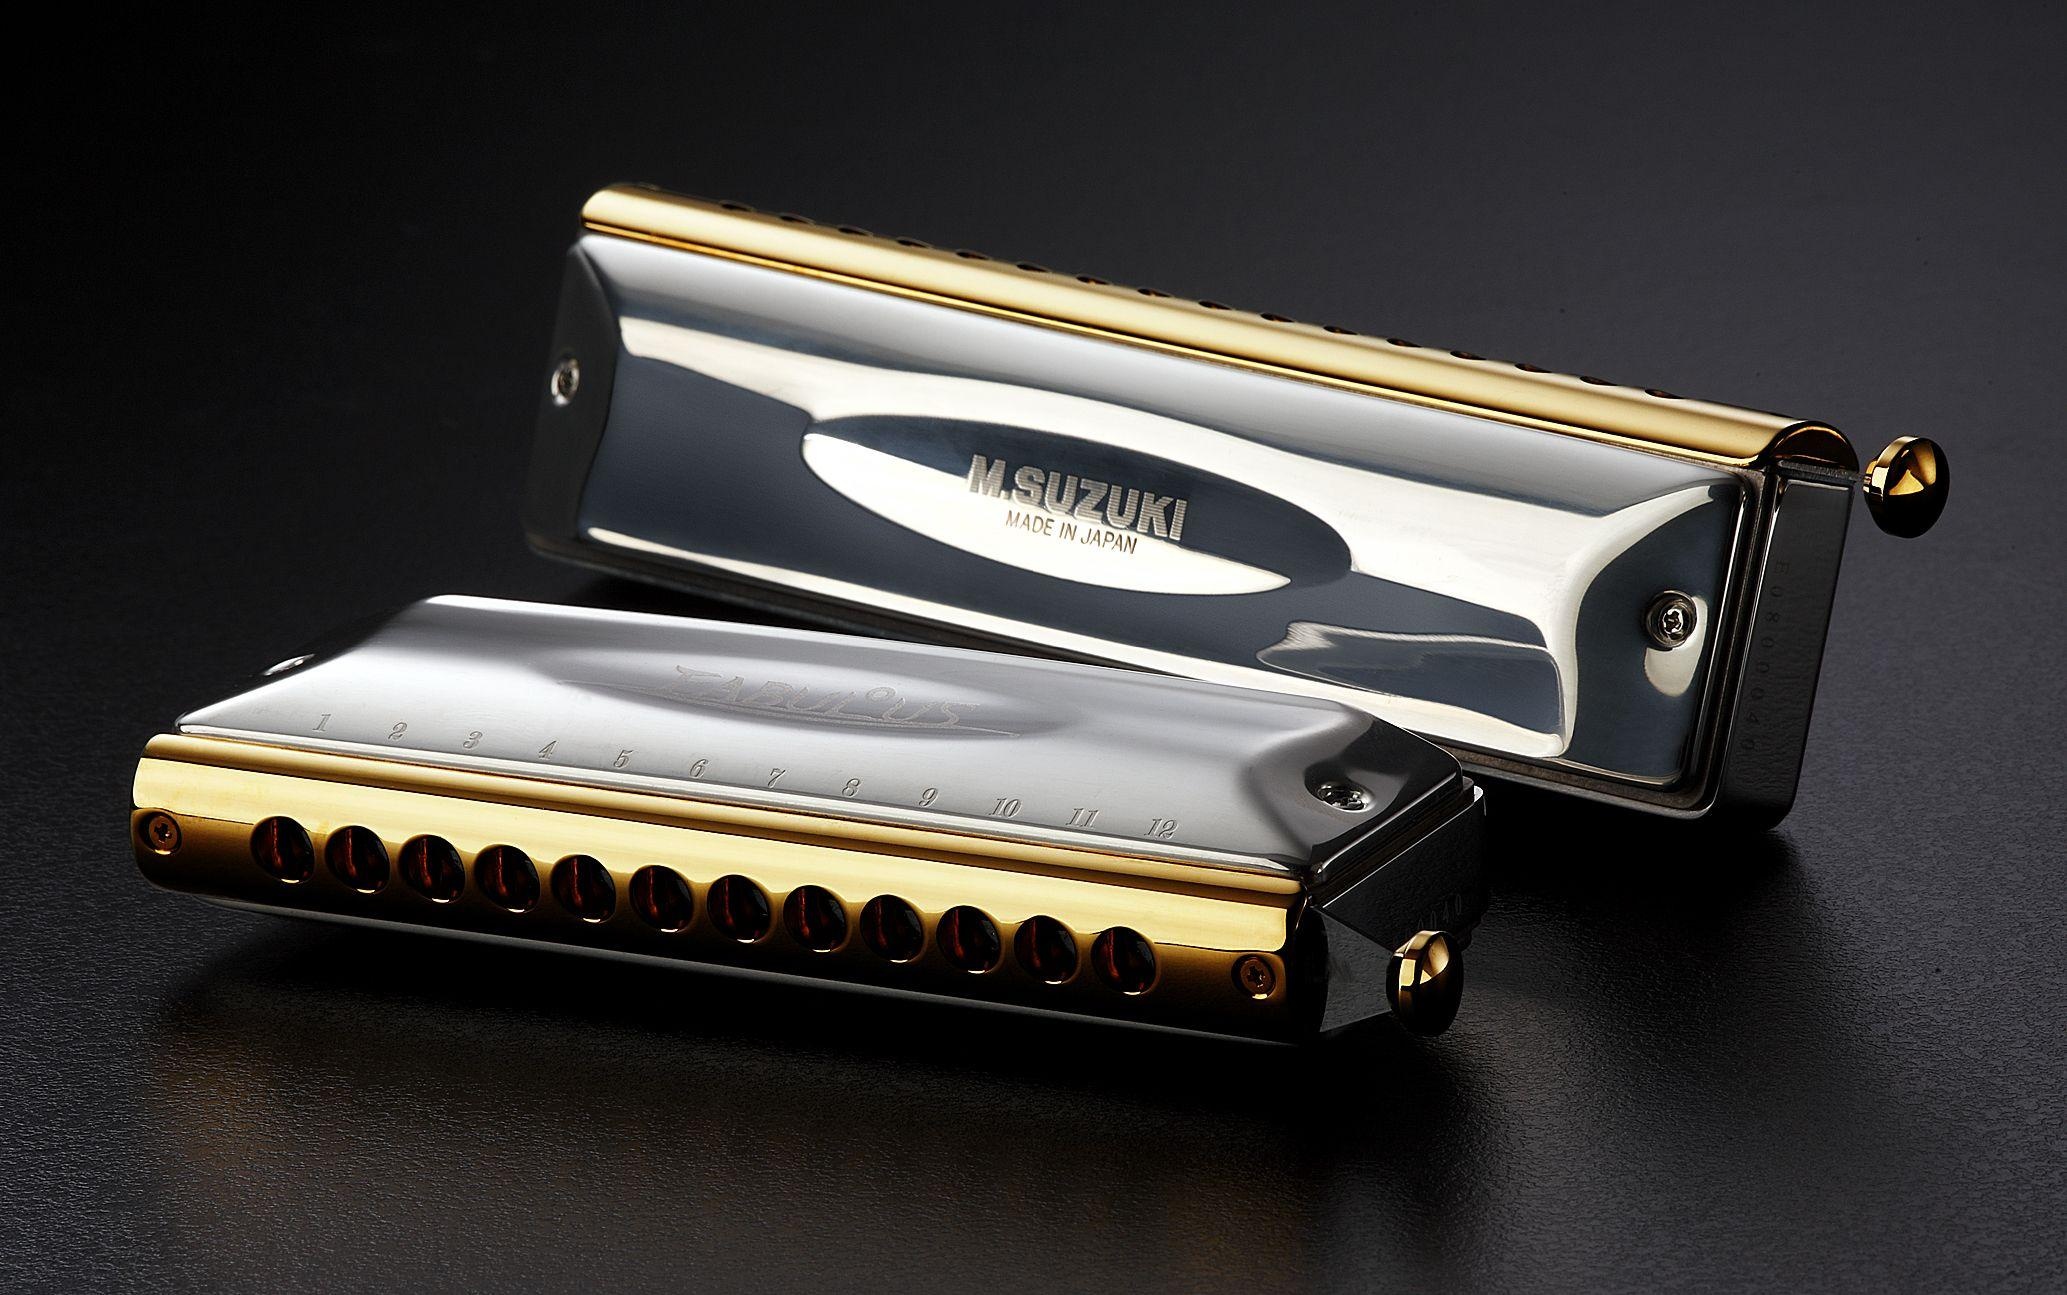 Harmonica: Mouth Organ, A "Hands-Free" 12-Hole Modification, Airflow, Lever-Operated Flap, M. Suzuki. 2070x1300 HD Wallpaper.